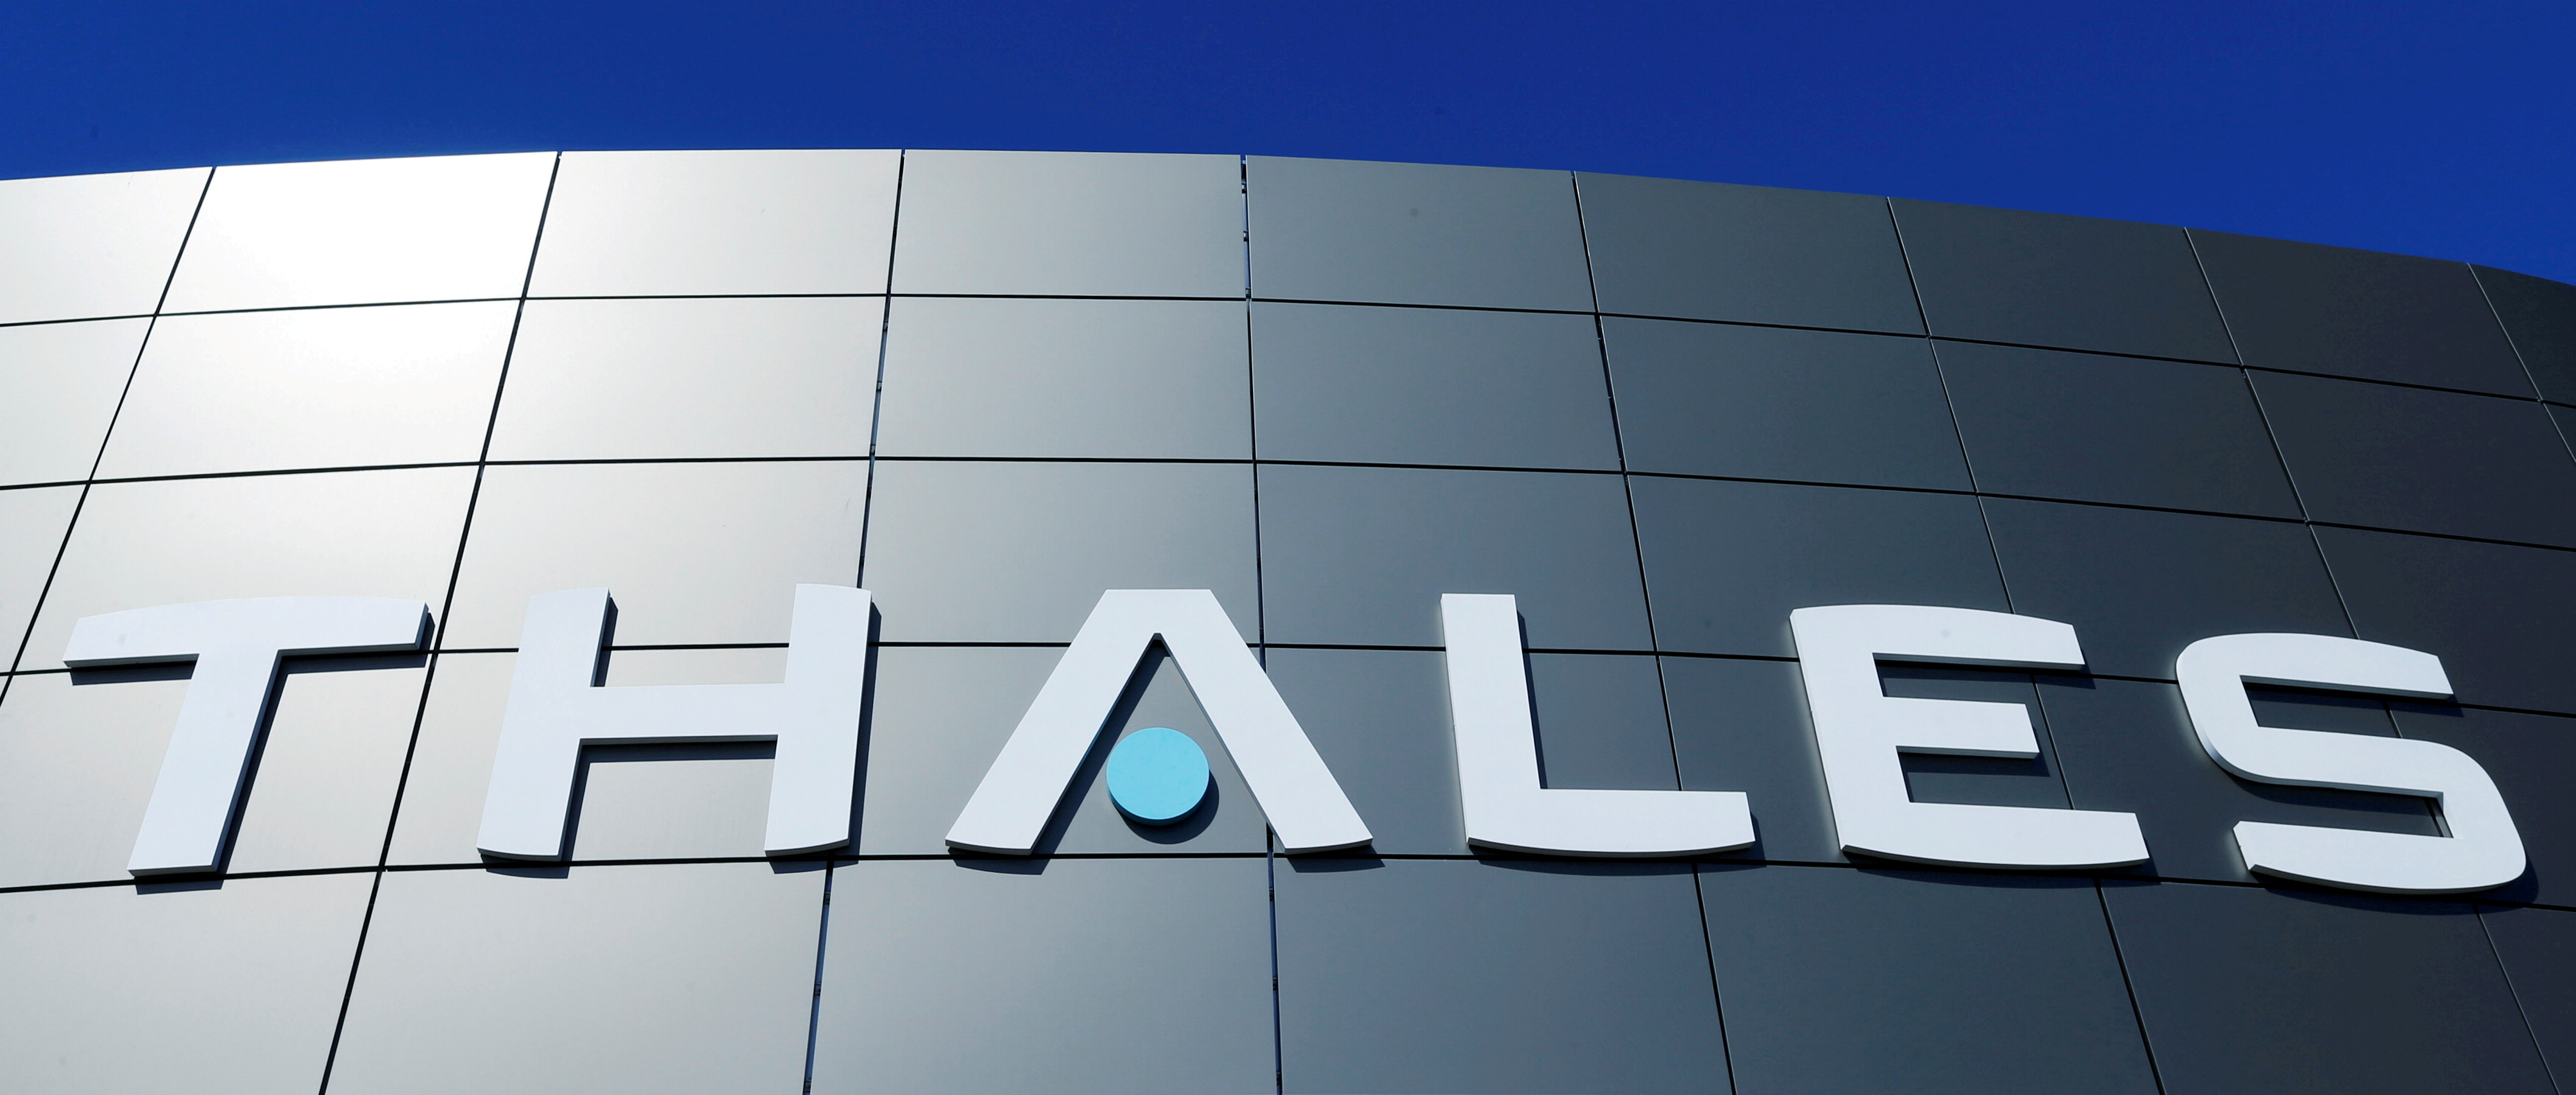 Thales to sell signalling business to Hitachi in $2 bln deal